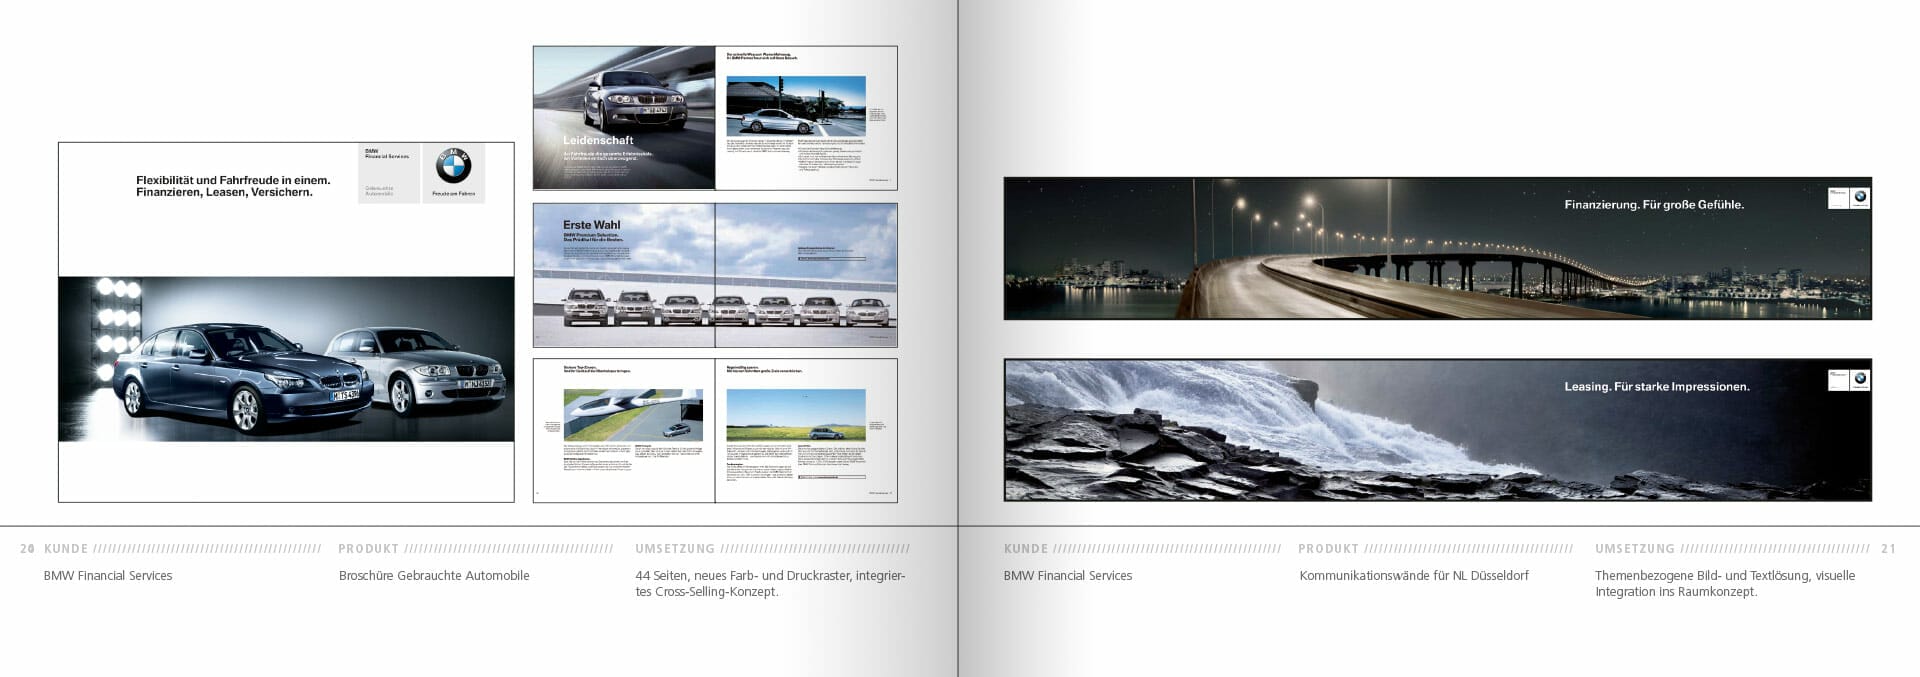 BMW Group Works 2001-2009 Booklet 20-21